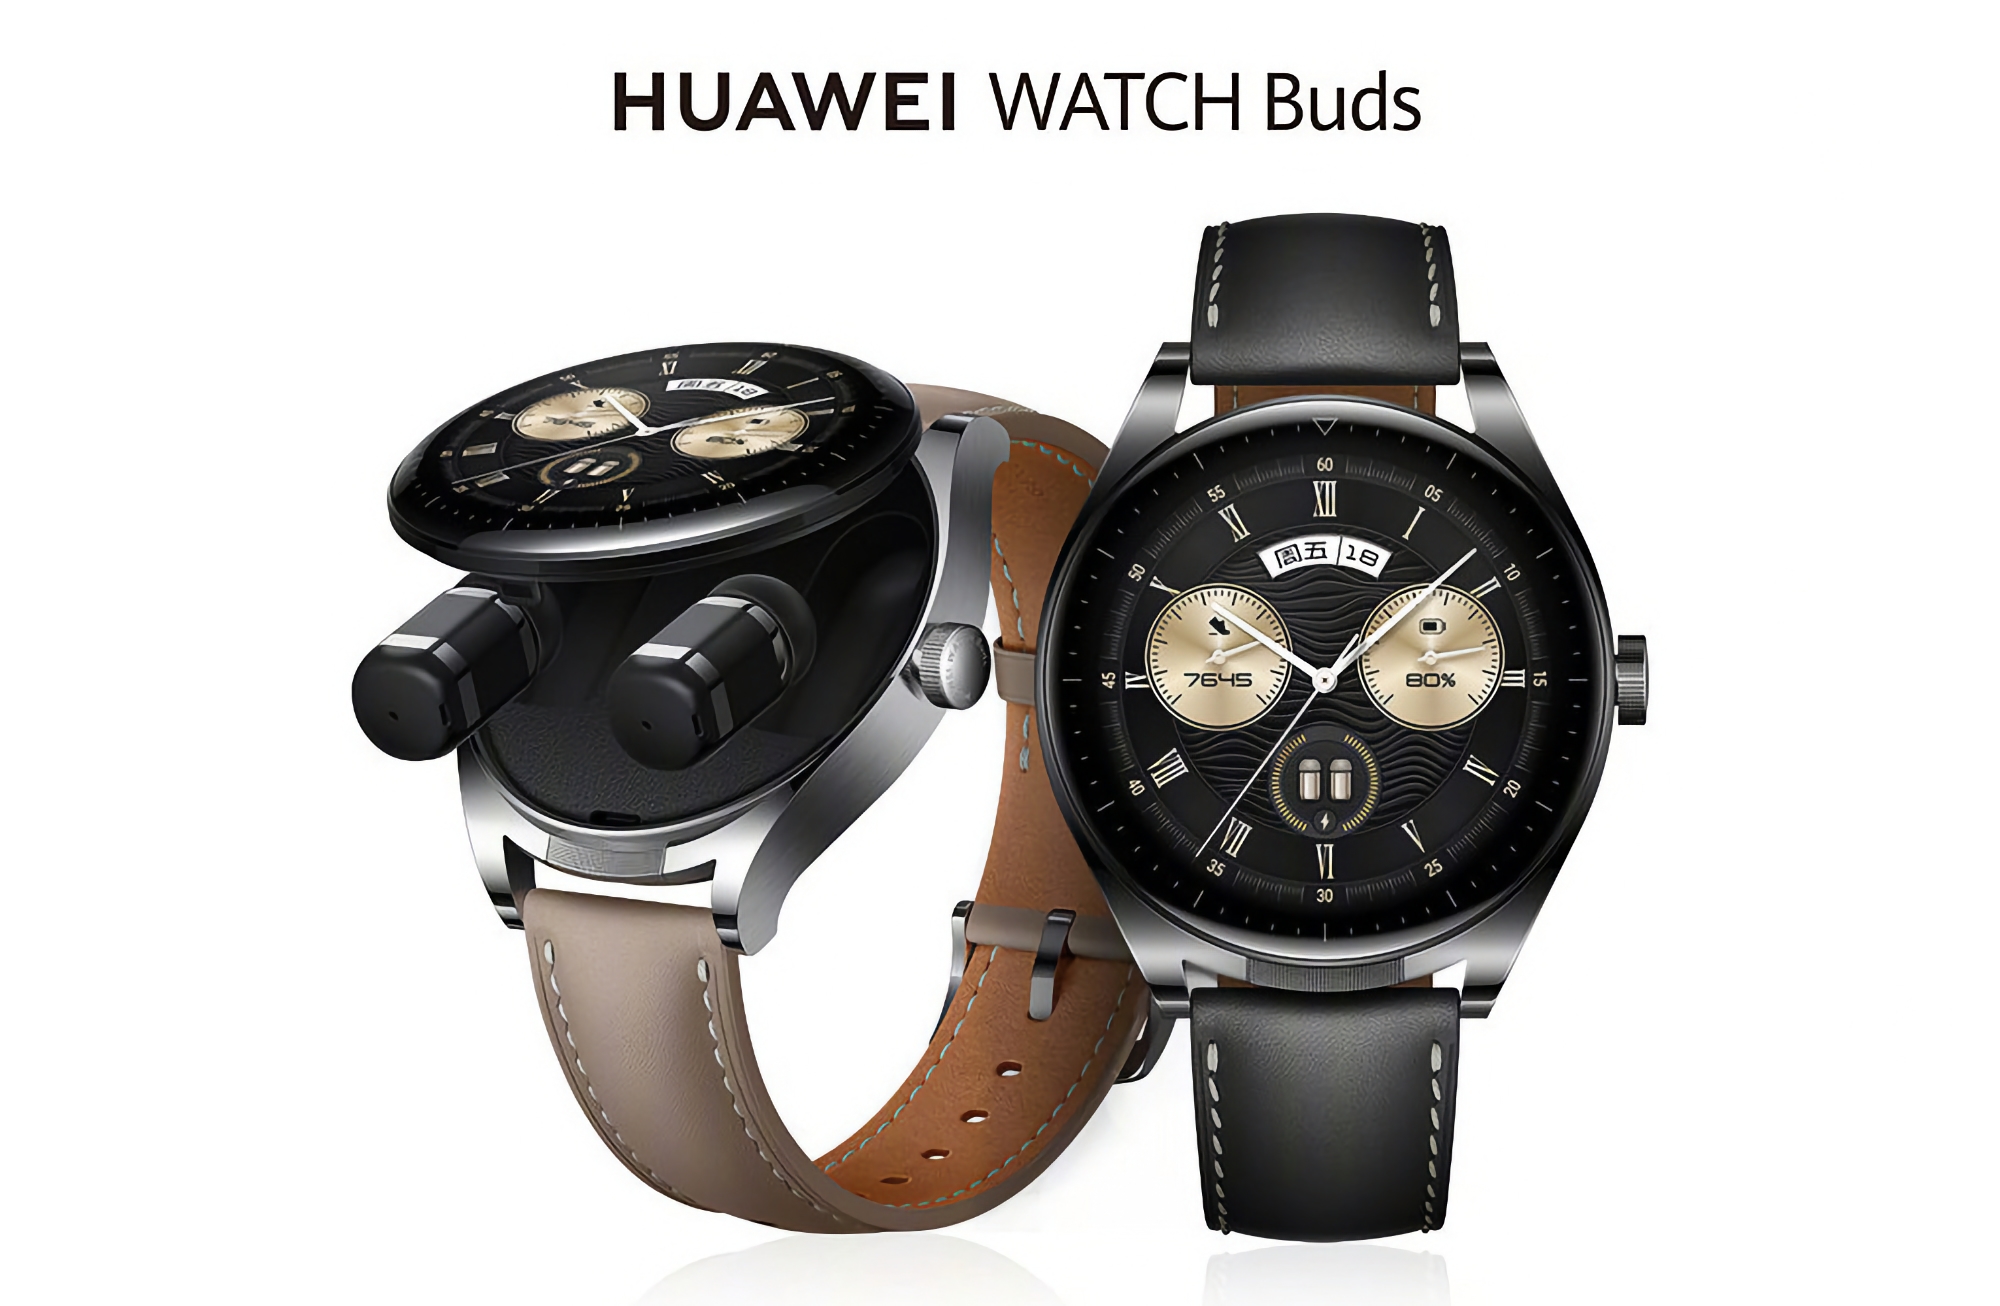 Huawei Watch Buds have received a new software version